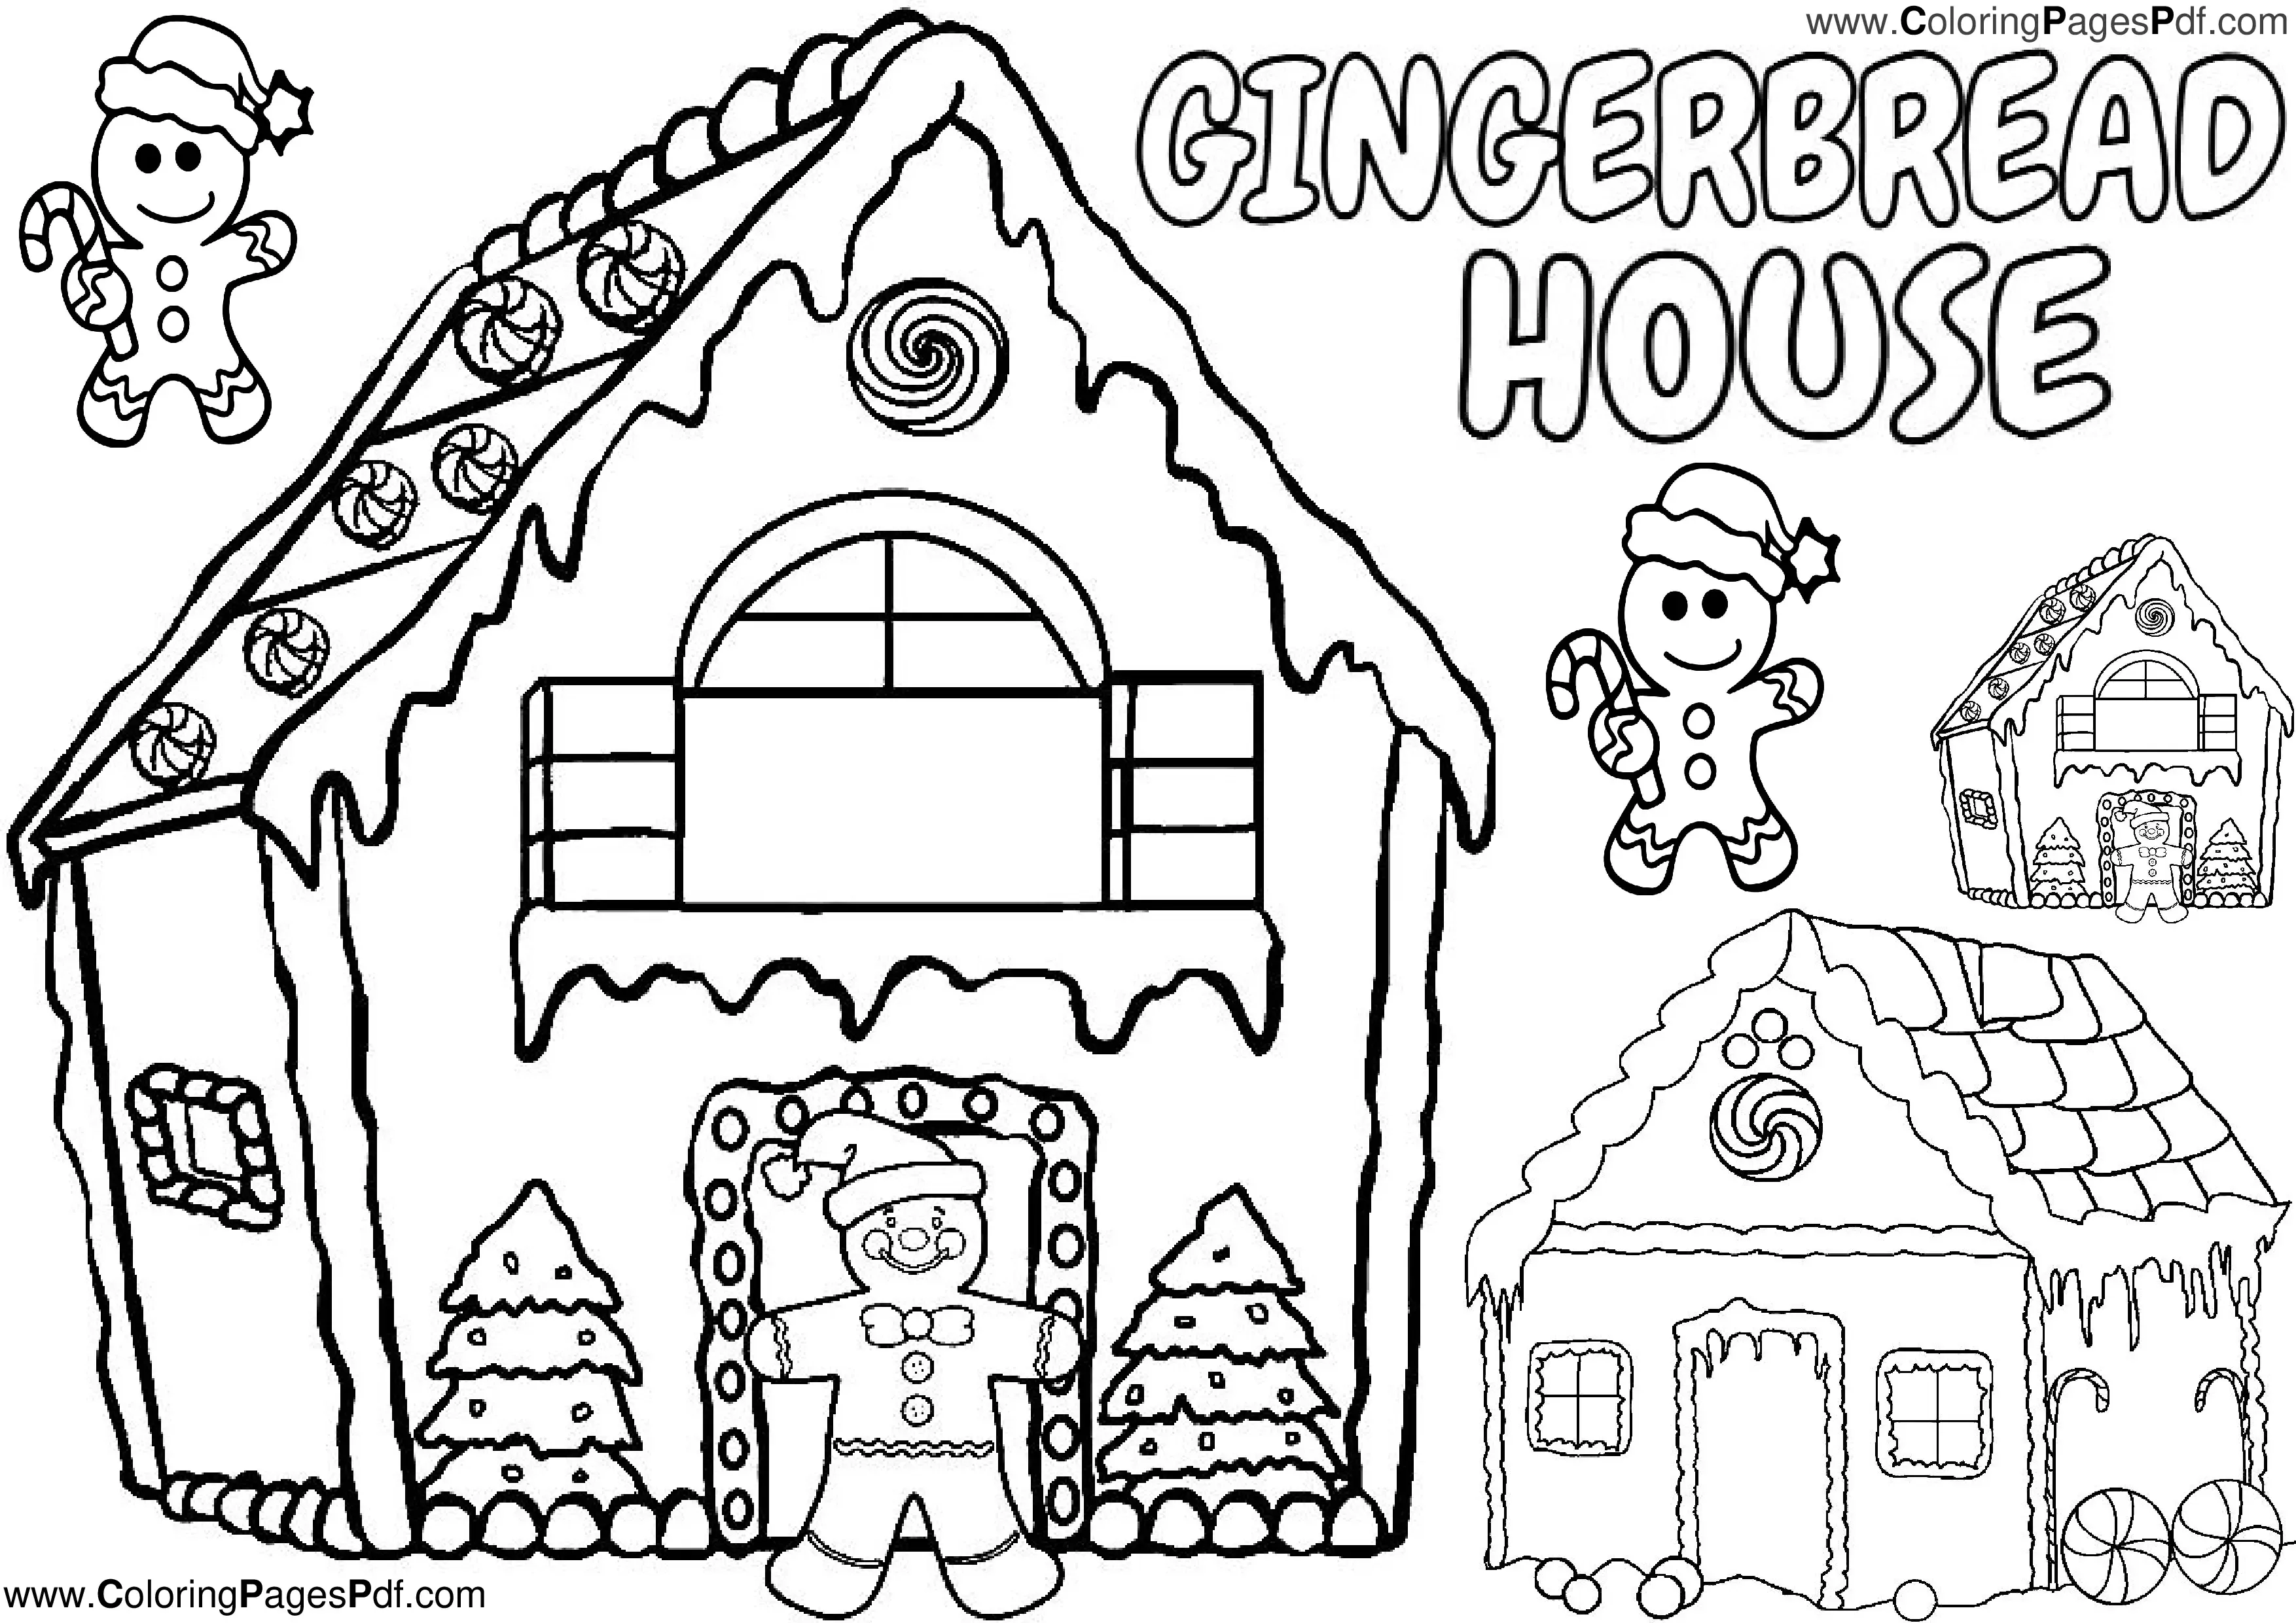 Gingerbread house coloring pictures